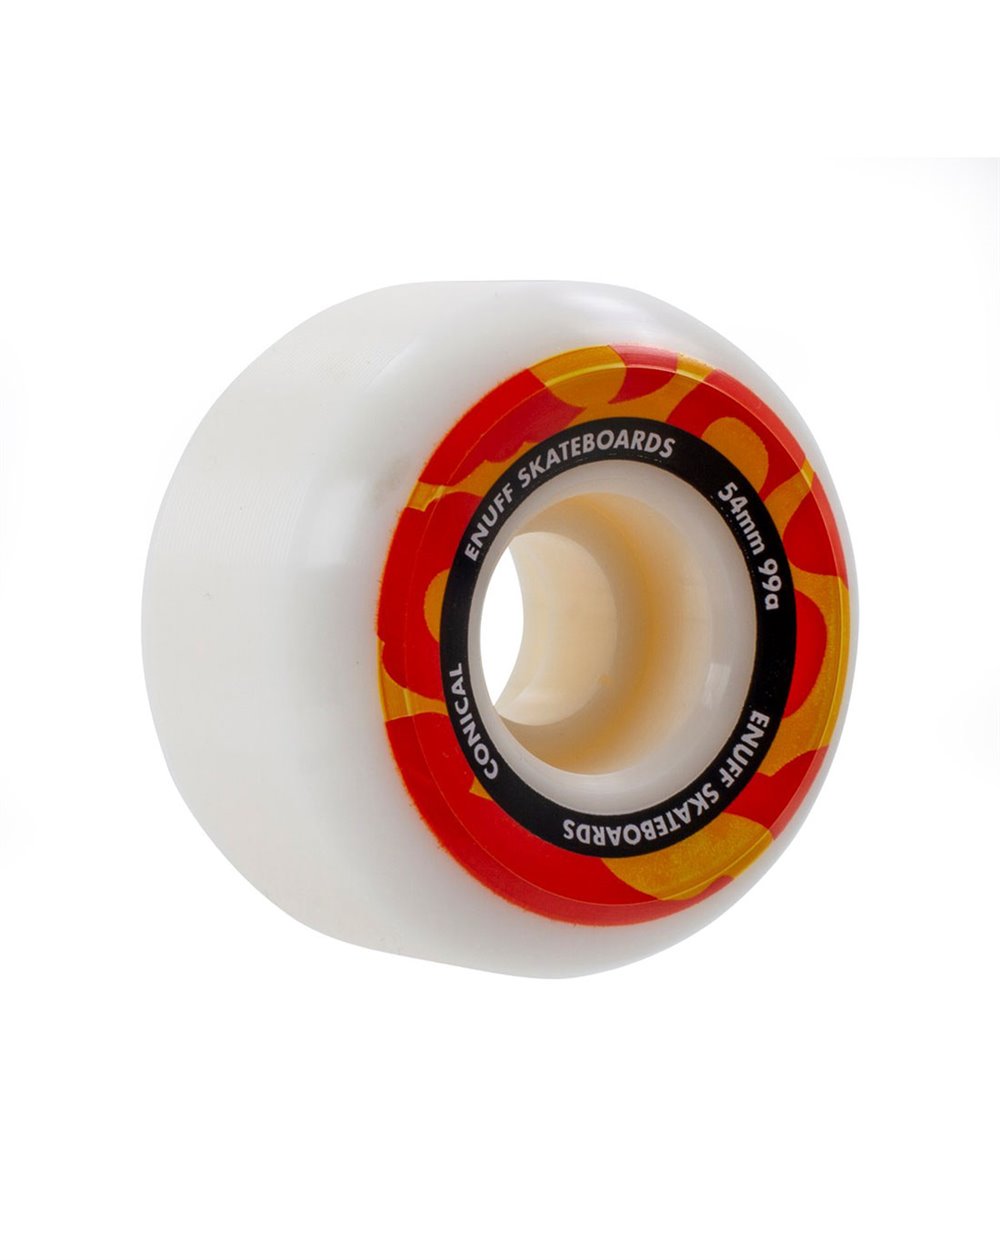 Enuff Conical 54mm 99A Skateboard Wheels pack of 4